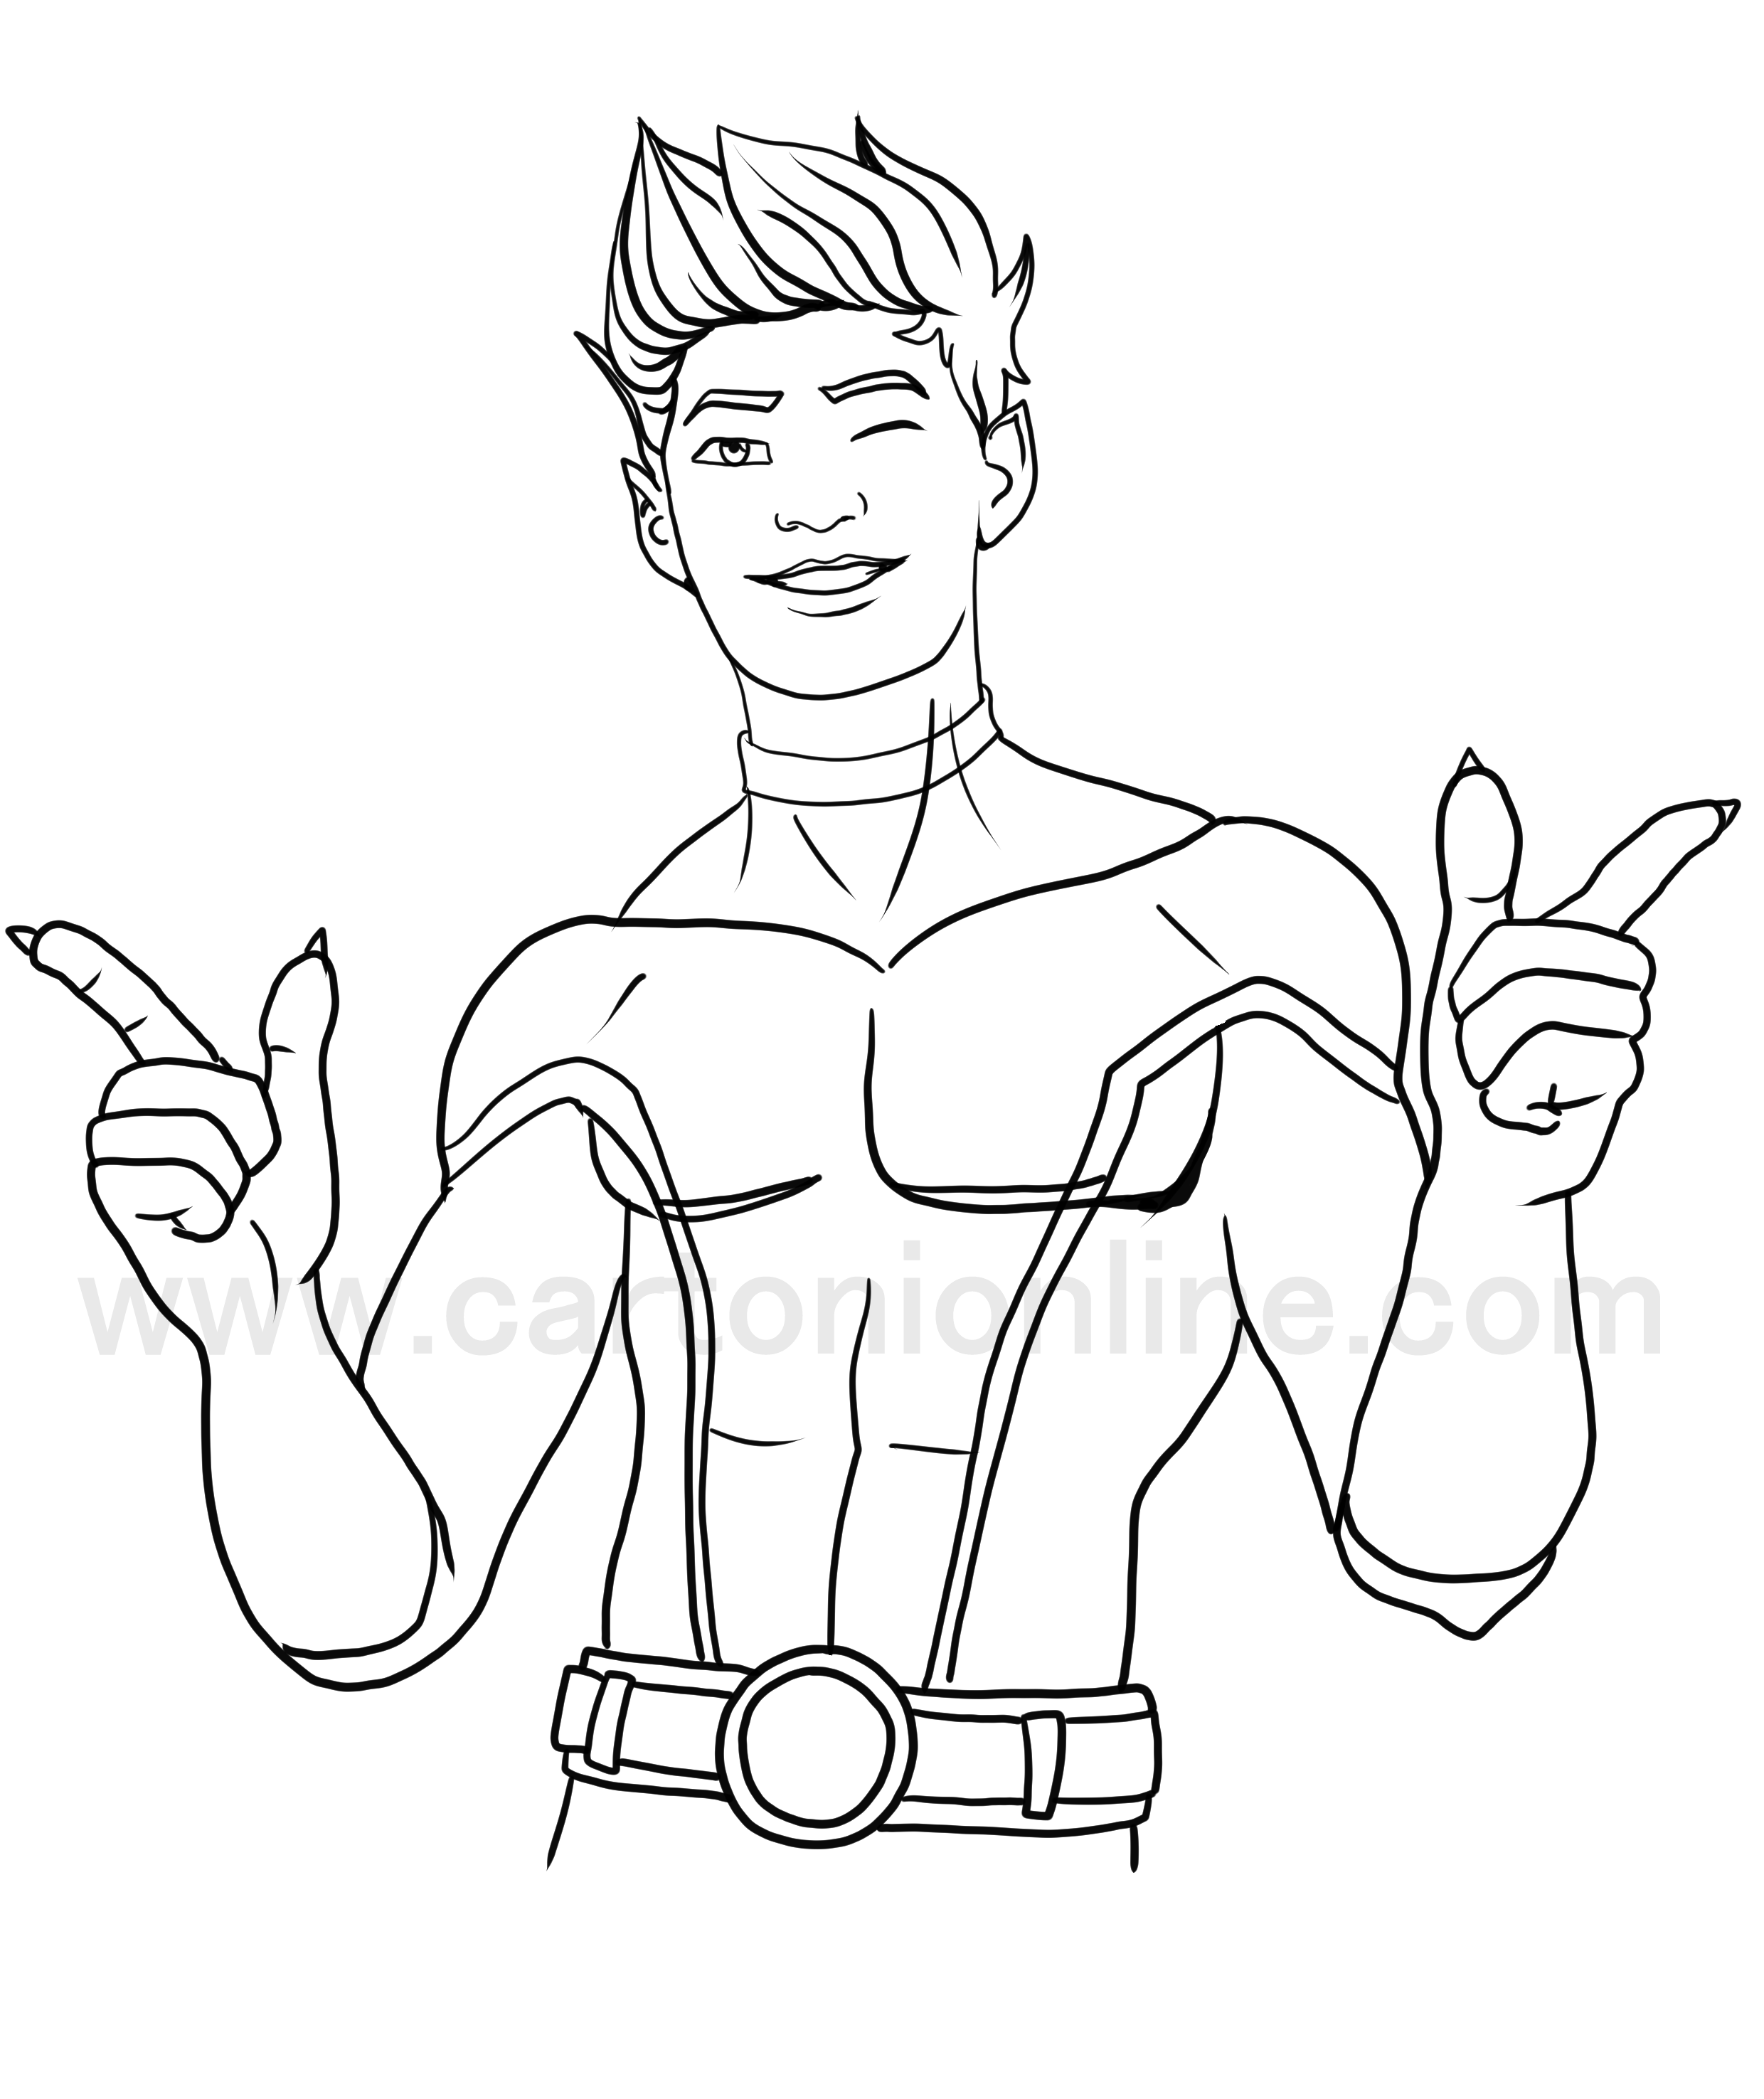 Beast Boy from Fortnite coloring page to print and coloring